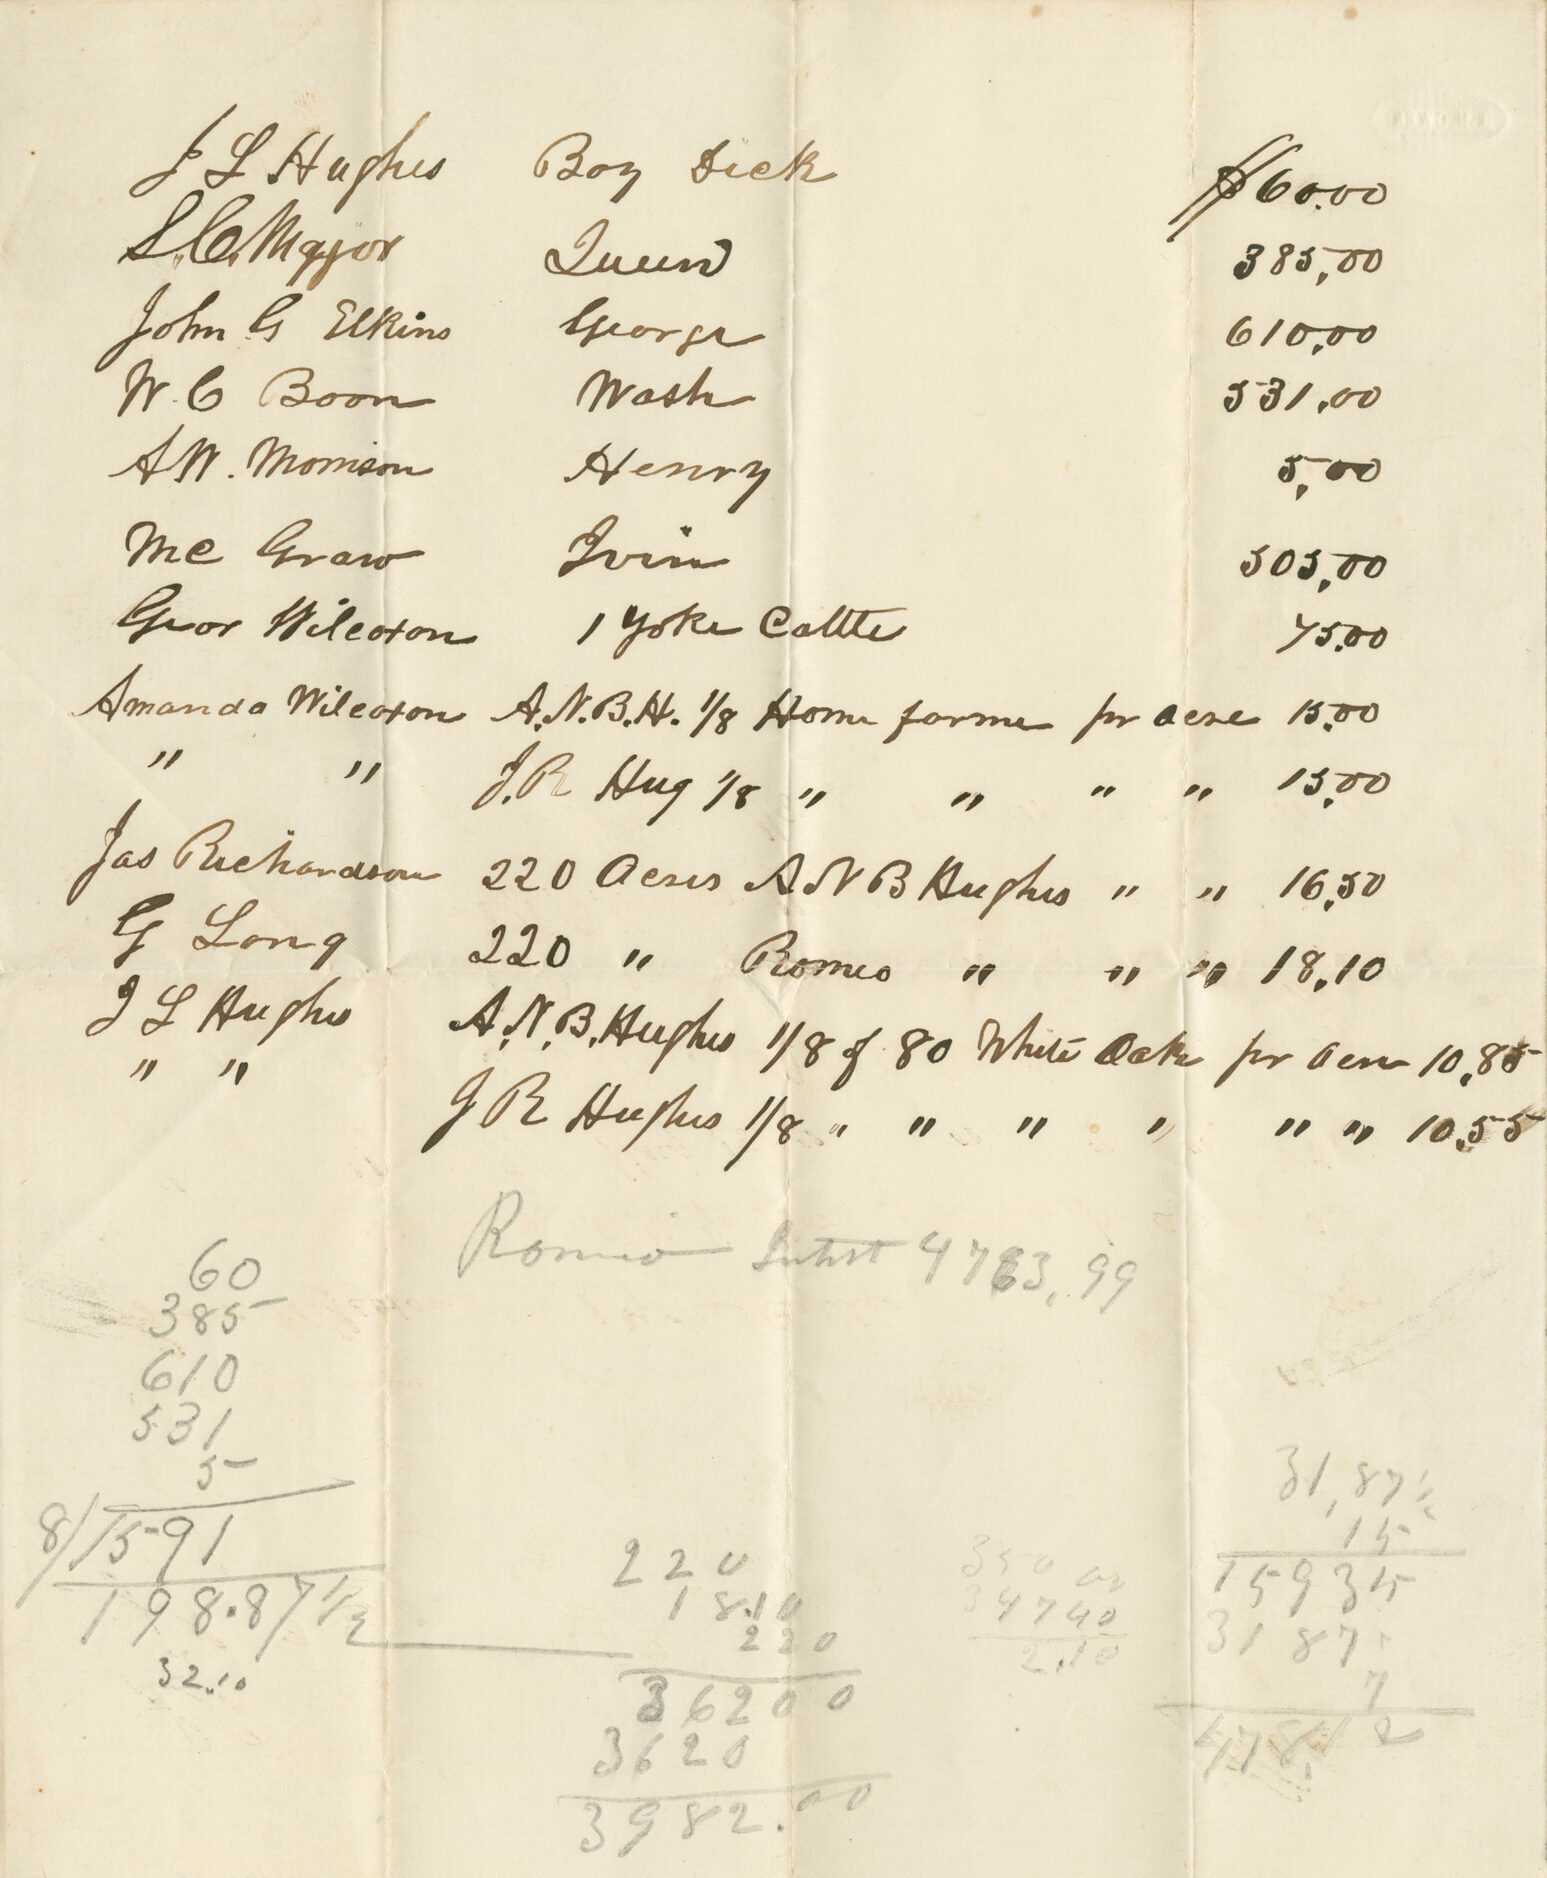 A single sheet document listing sales of enslaved persons, farm equipment and acreage to various buyers from the papers of Alfred Williams Morrison. The information is presented in three columns with the buyers at left, a description of property (including names of enslaved persons) at center, and the price at right. The list of buyers includes S.M. Morrison (son of A. W. Morrison), J. L. Hughes, W.G. Boon, McGraw, and Jas. Richardson among others. The list of enslaved persons is "Boy Dick, Queen, George, Wash, Henry, and (illegible)." Also listed is "1 Yoke Cattle" and several parcels of land. The sales are listed in ink and there are various figures and equations written in graphite on the lower half of the document. There are no marks or inscriptions on the verso.